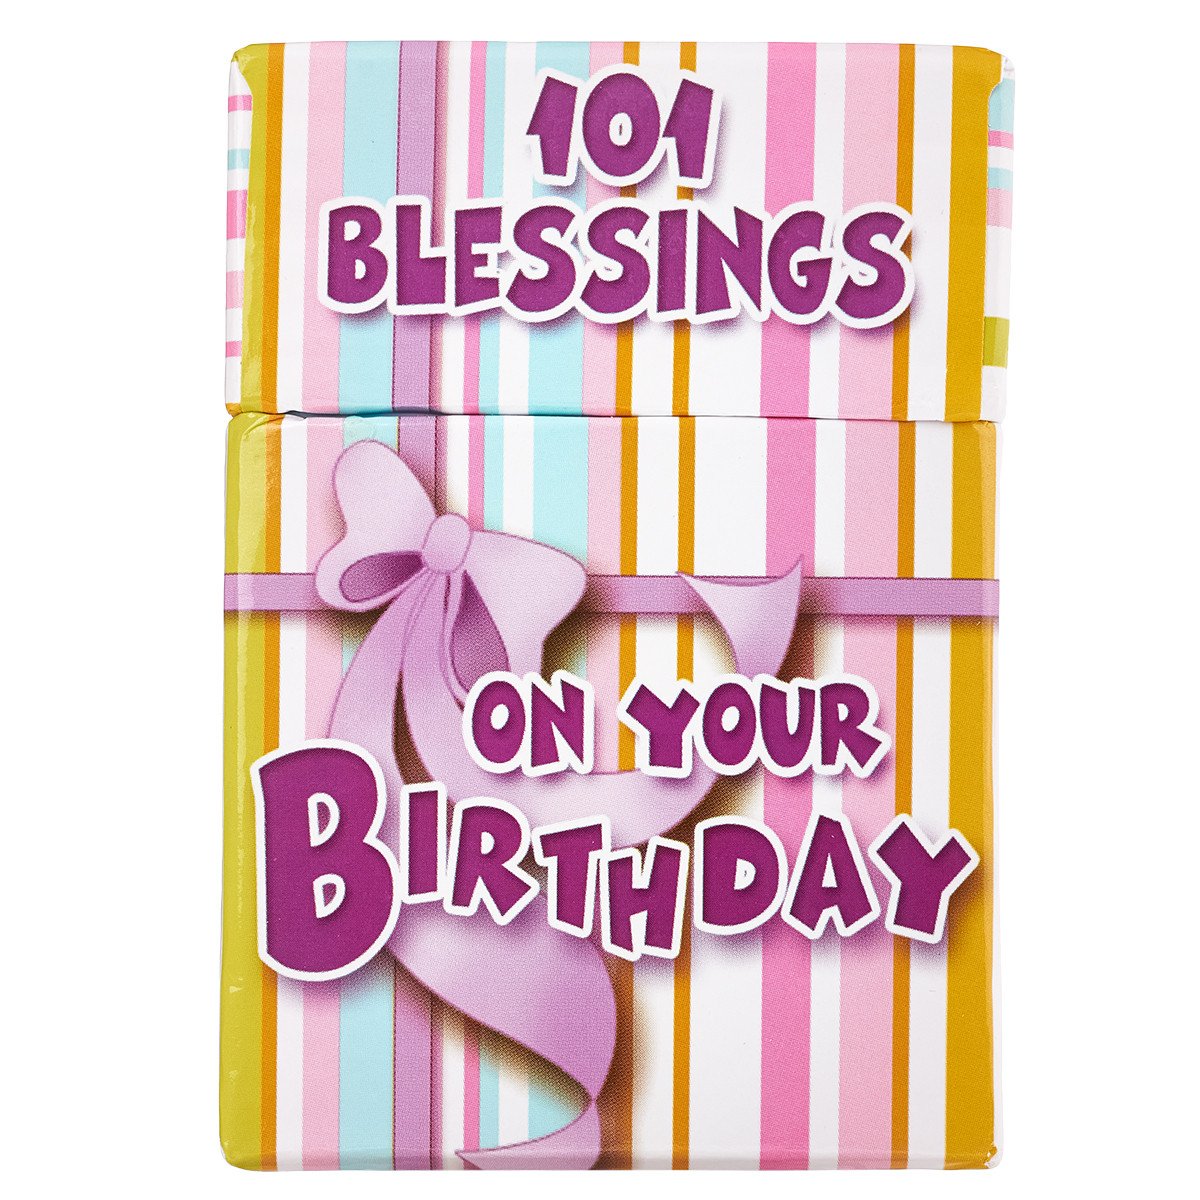 PROMISEBOX 101 BLESSINGS ON YOUR BIRTHDAY